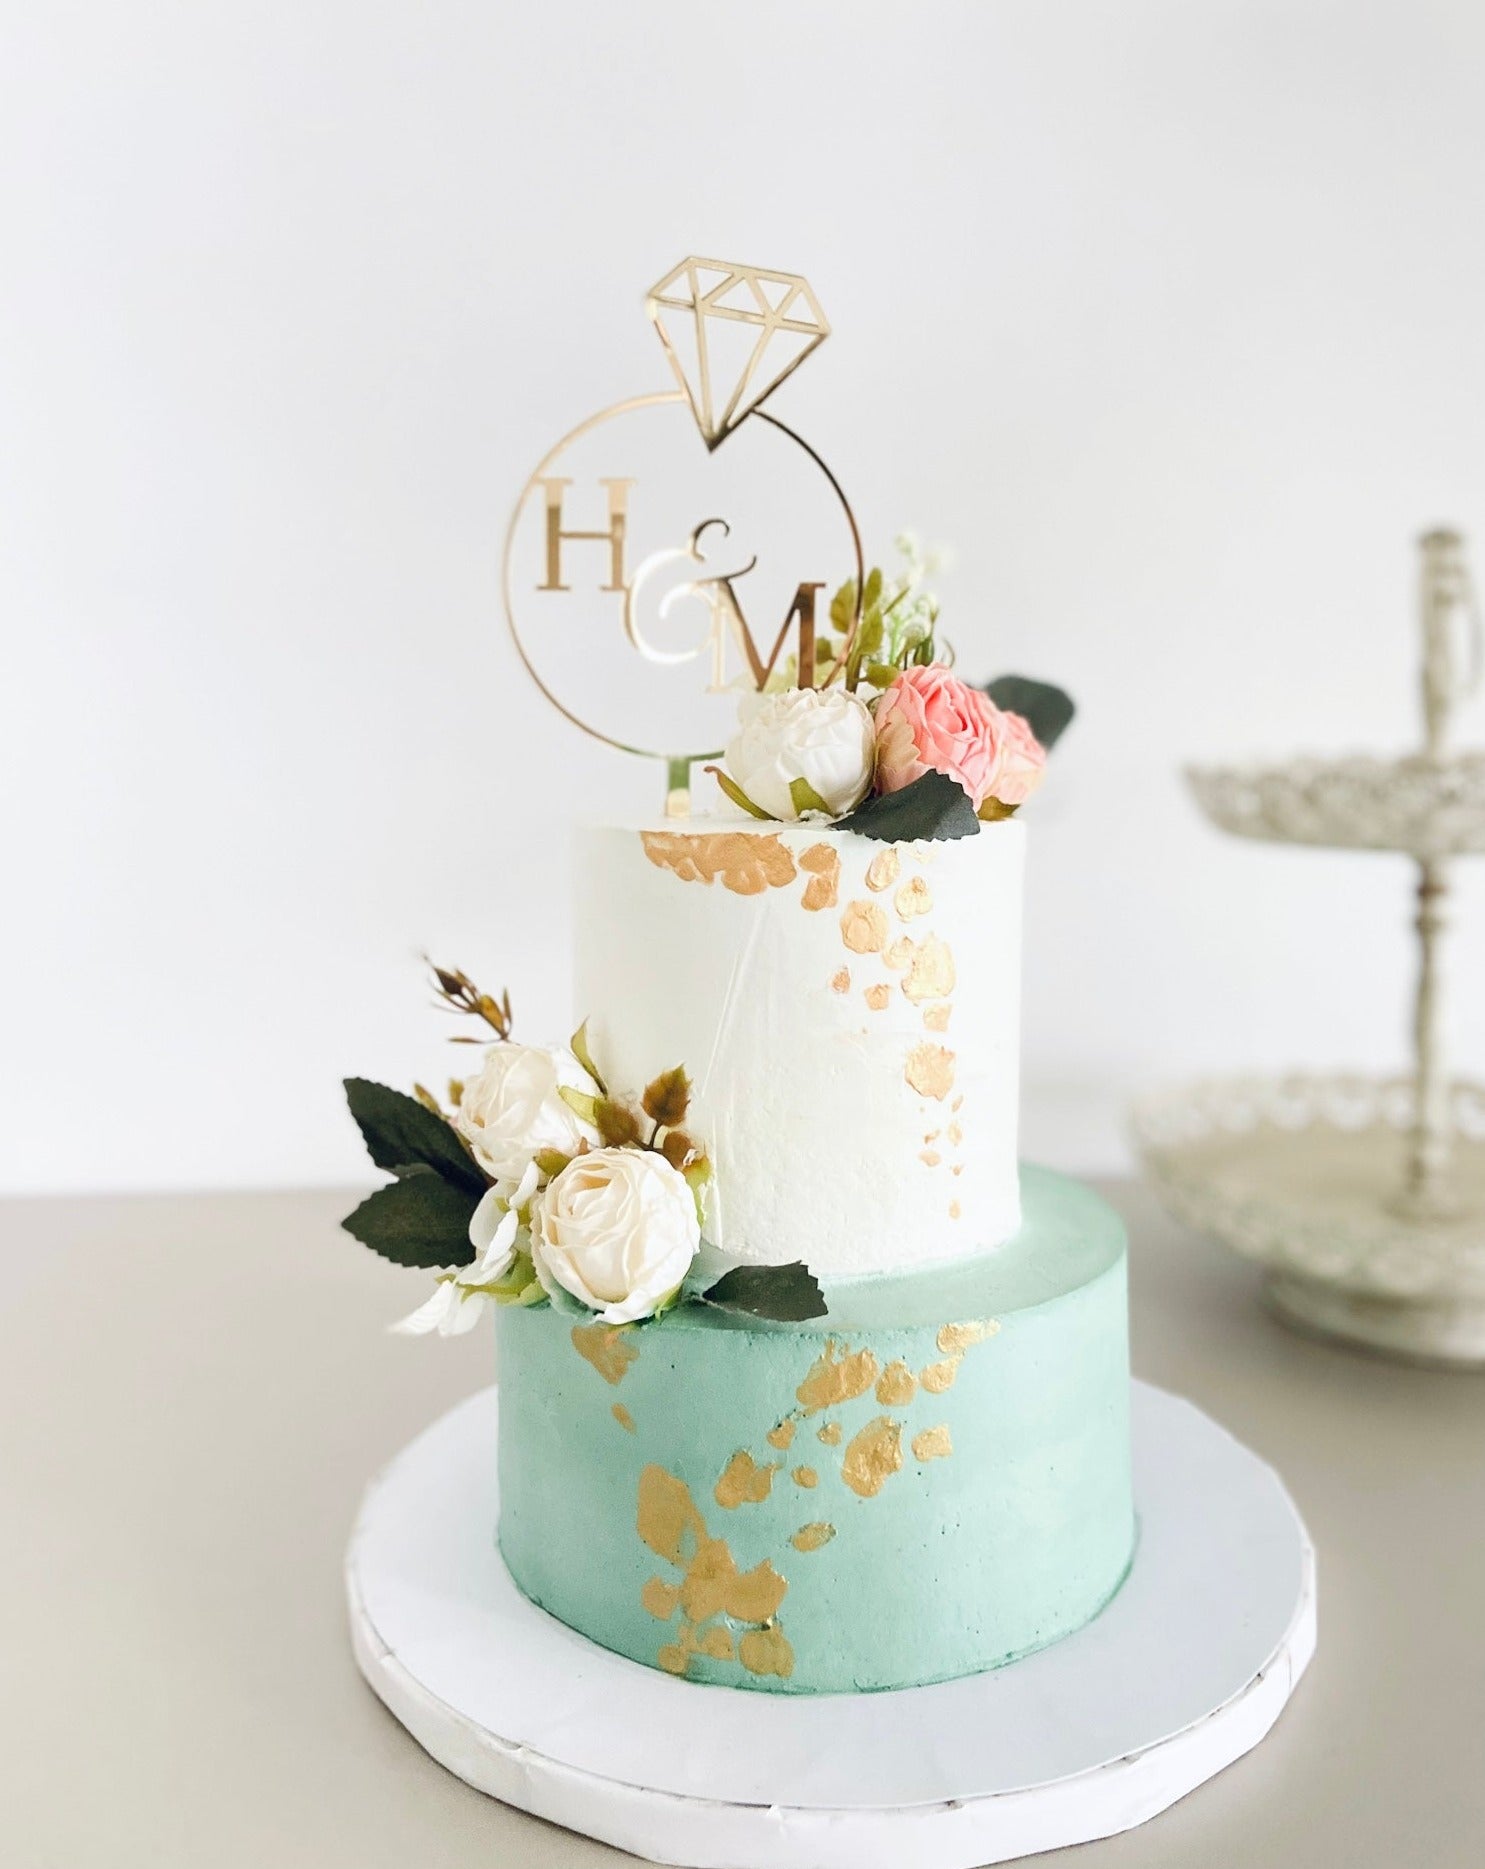 Best of 2020 | 12 of our favourite wedding cakes | Year end favourite